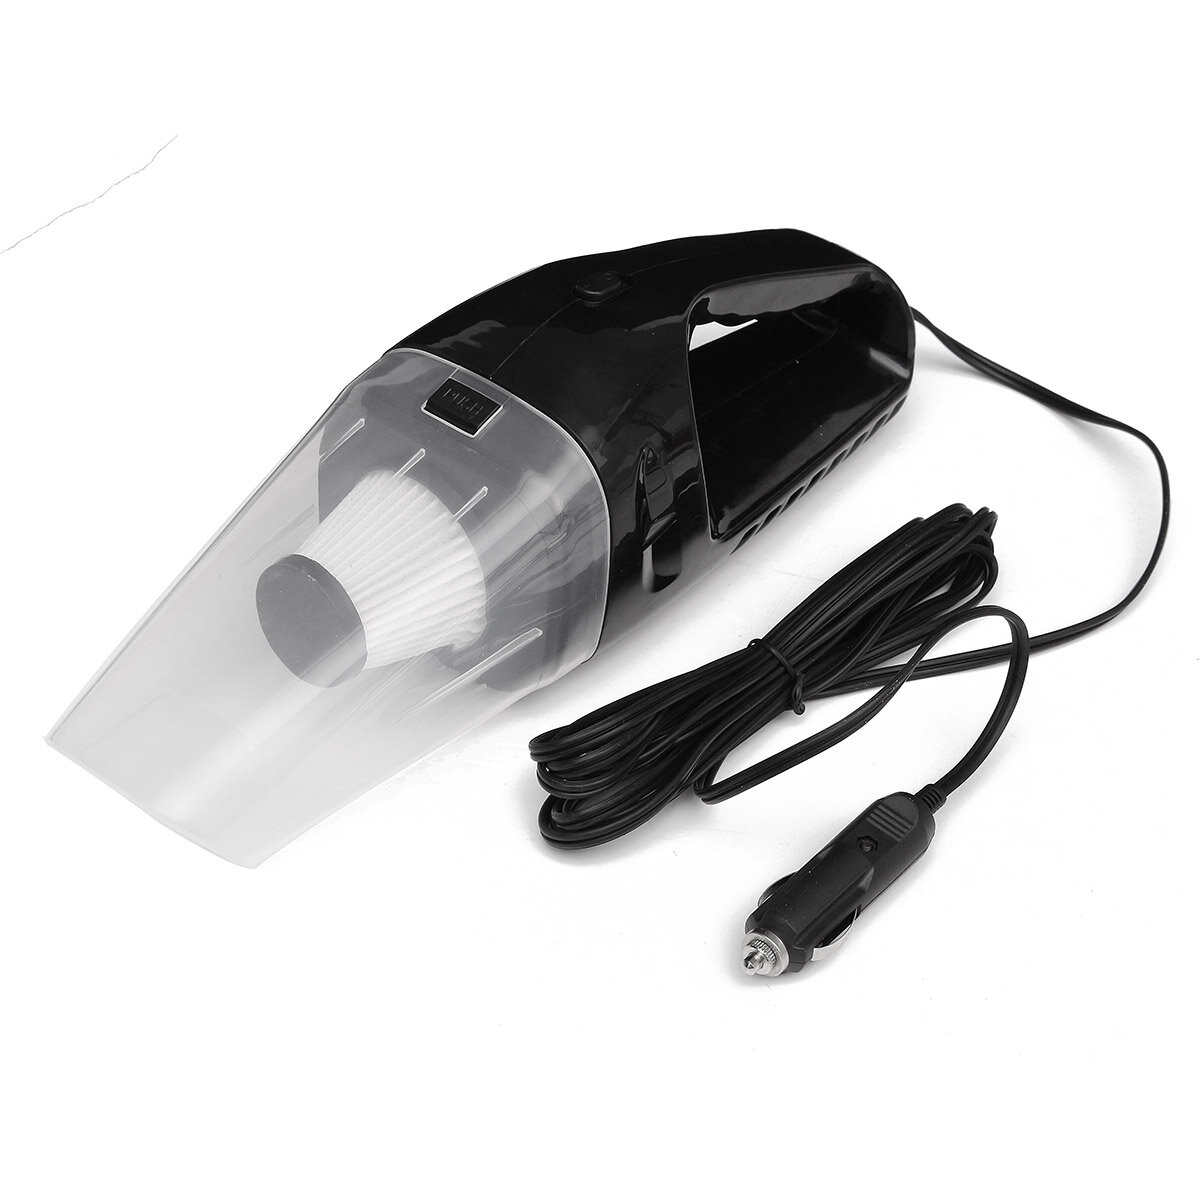 

150W 12V Portable Car Vehicle Vacuum Cleaner Handheld Auto Wet/Dry Dirt Duster